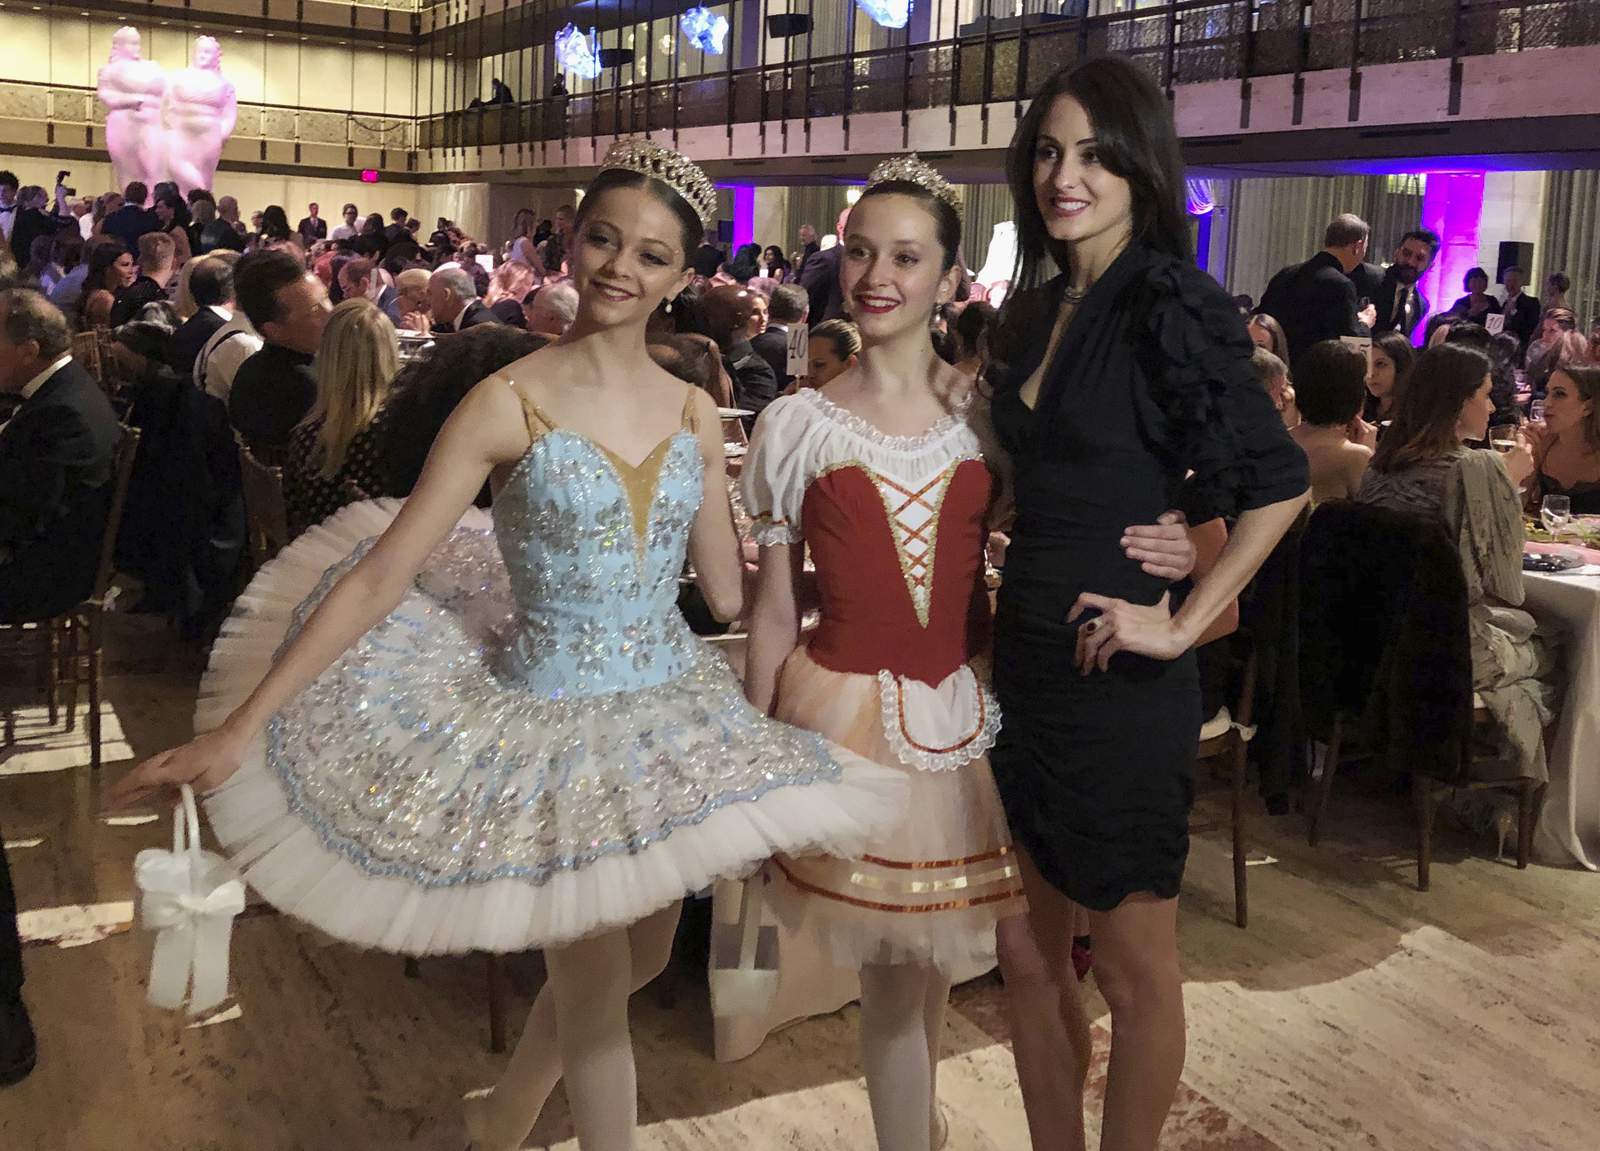 A night at the ballet, in time for ‘Nutcracker’ season